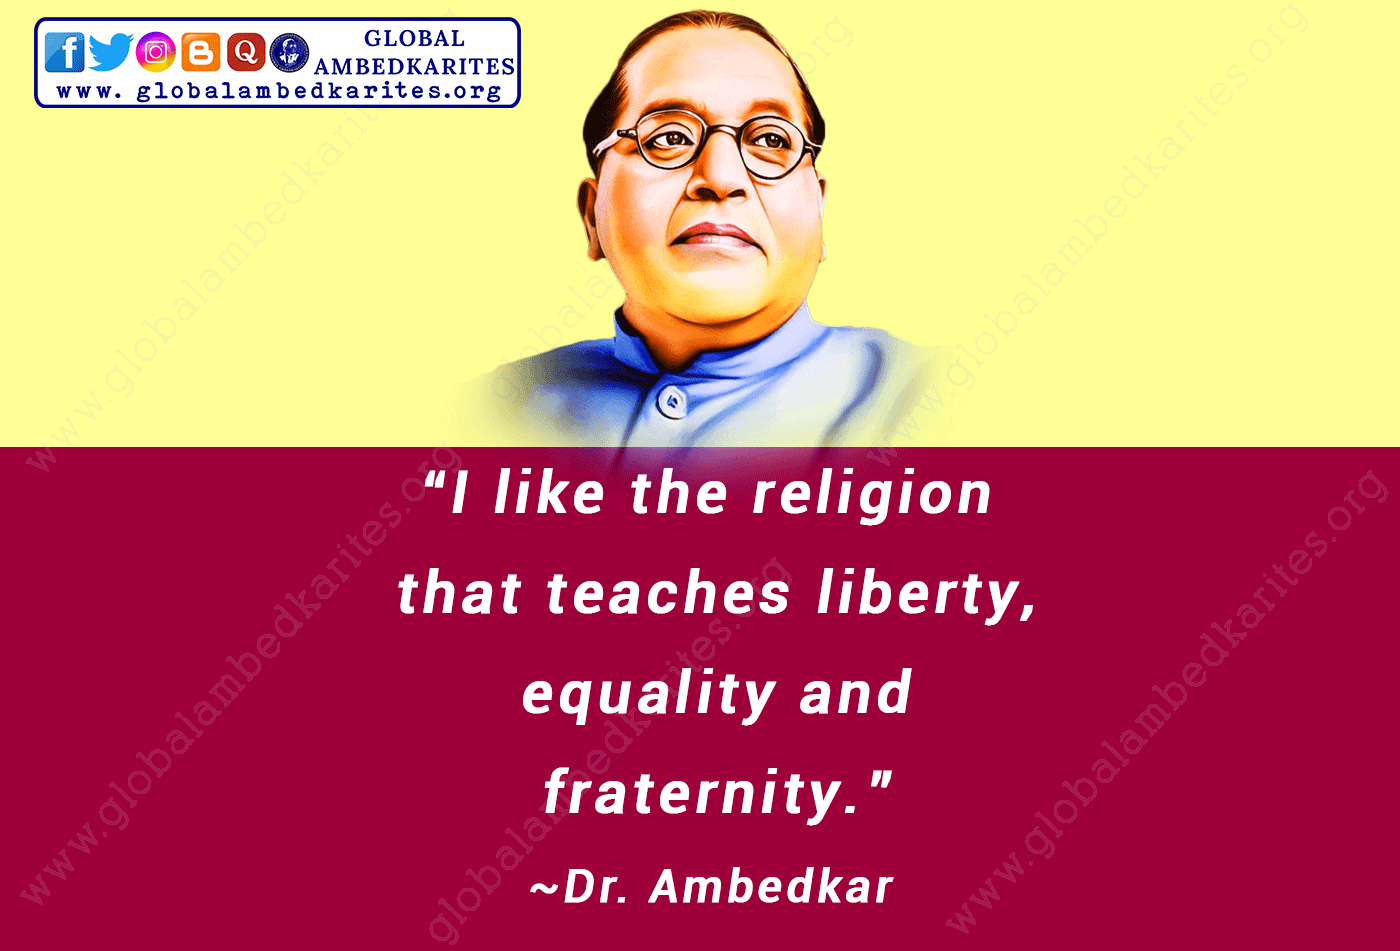 Param Poojya Dr - Dr Ambedkar Institute Of Management Studies And Research  Transparent PNG - 640x640 - Free Download on NicePNG